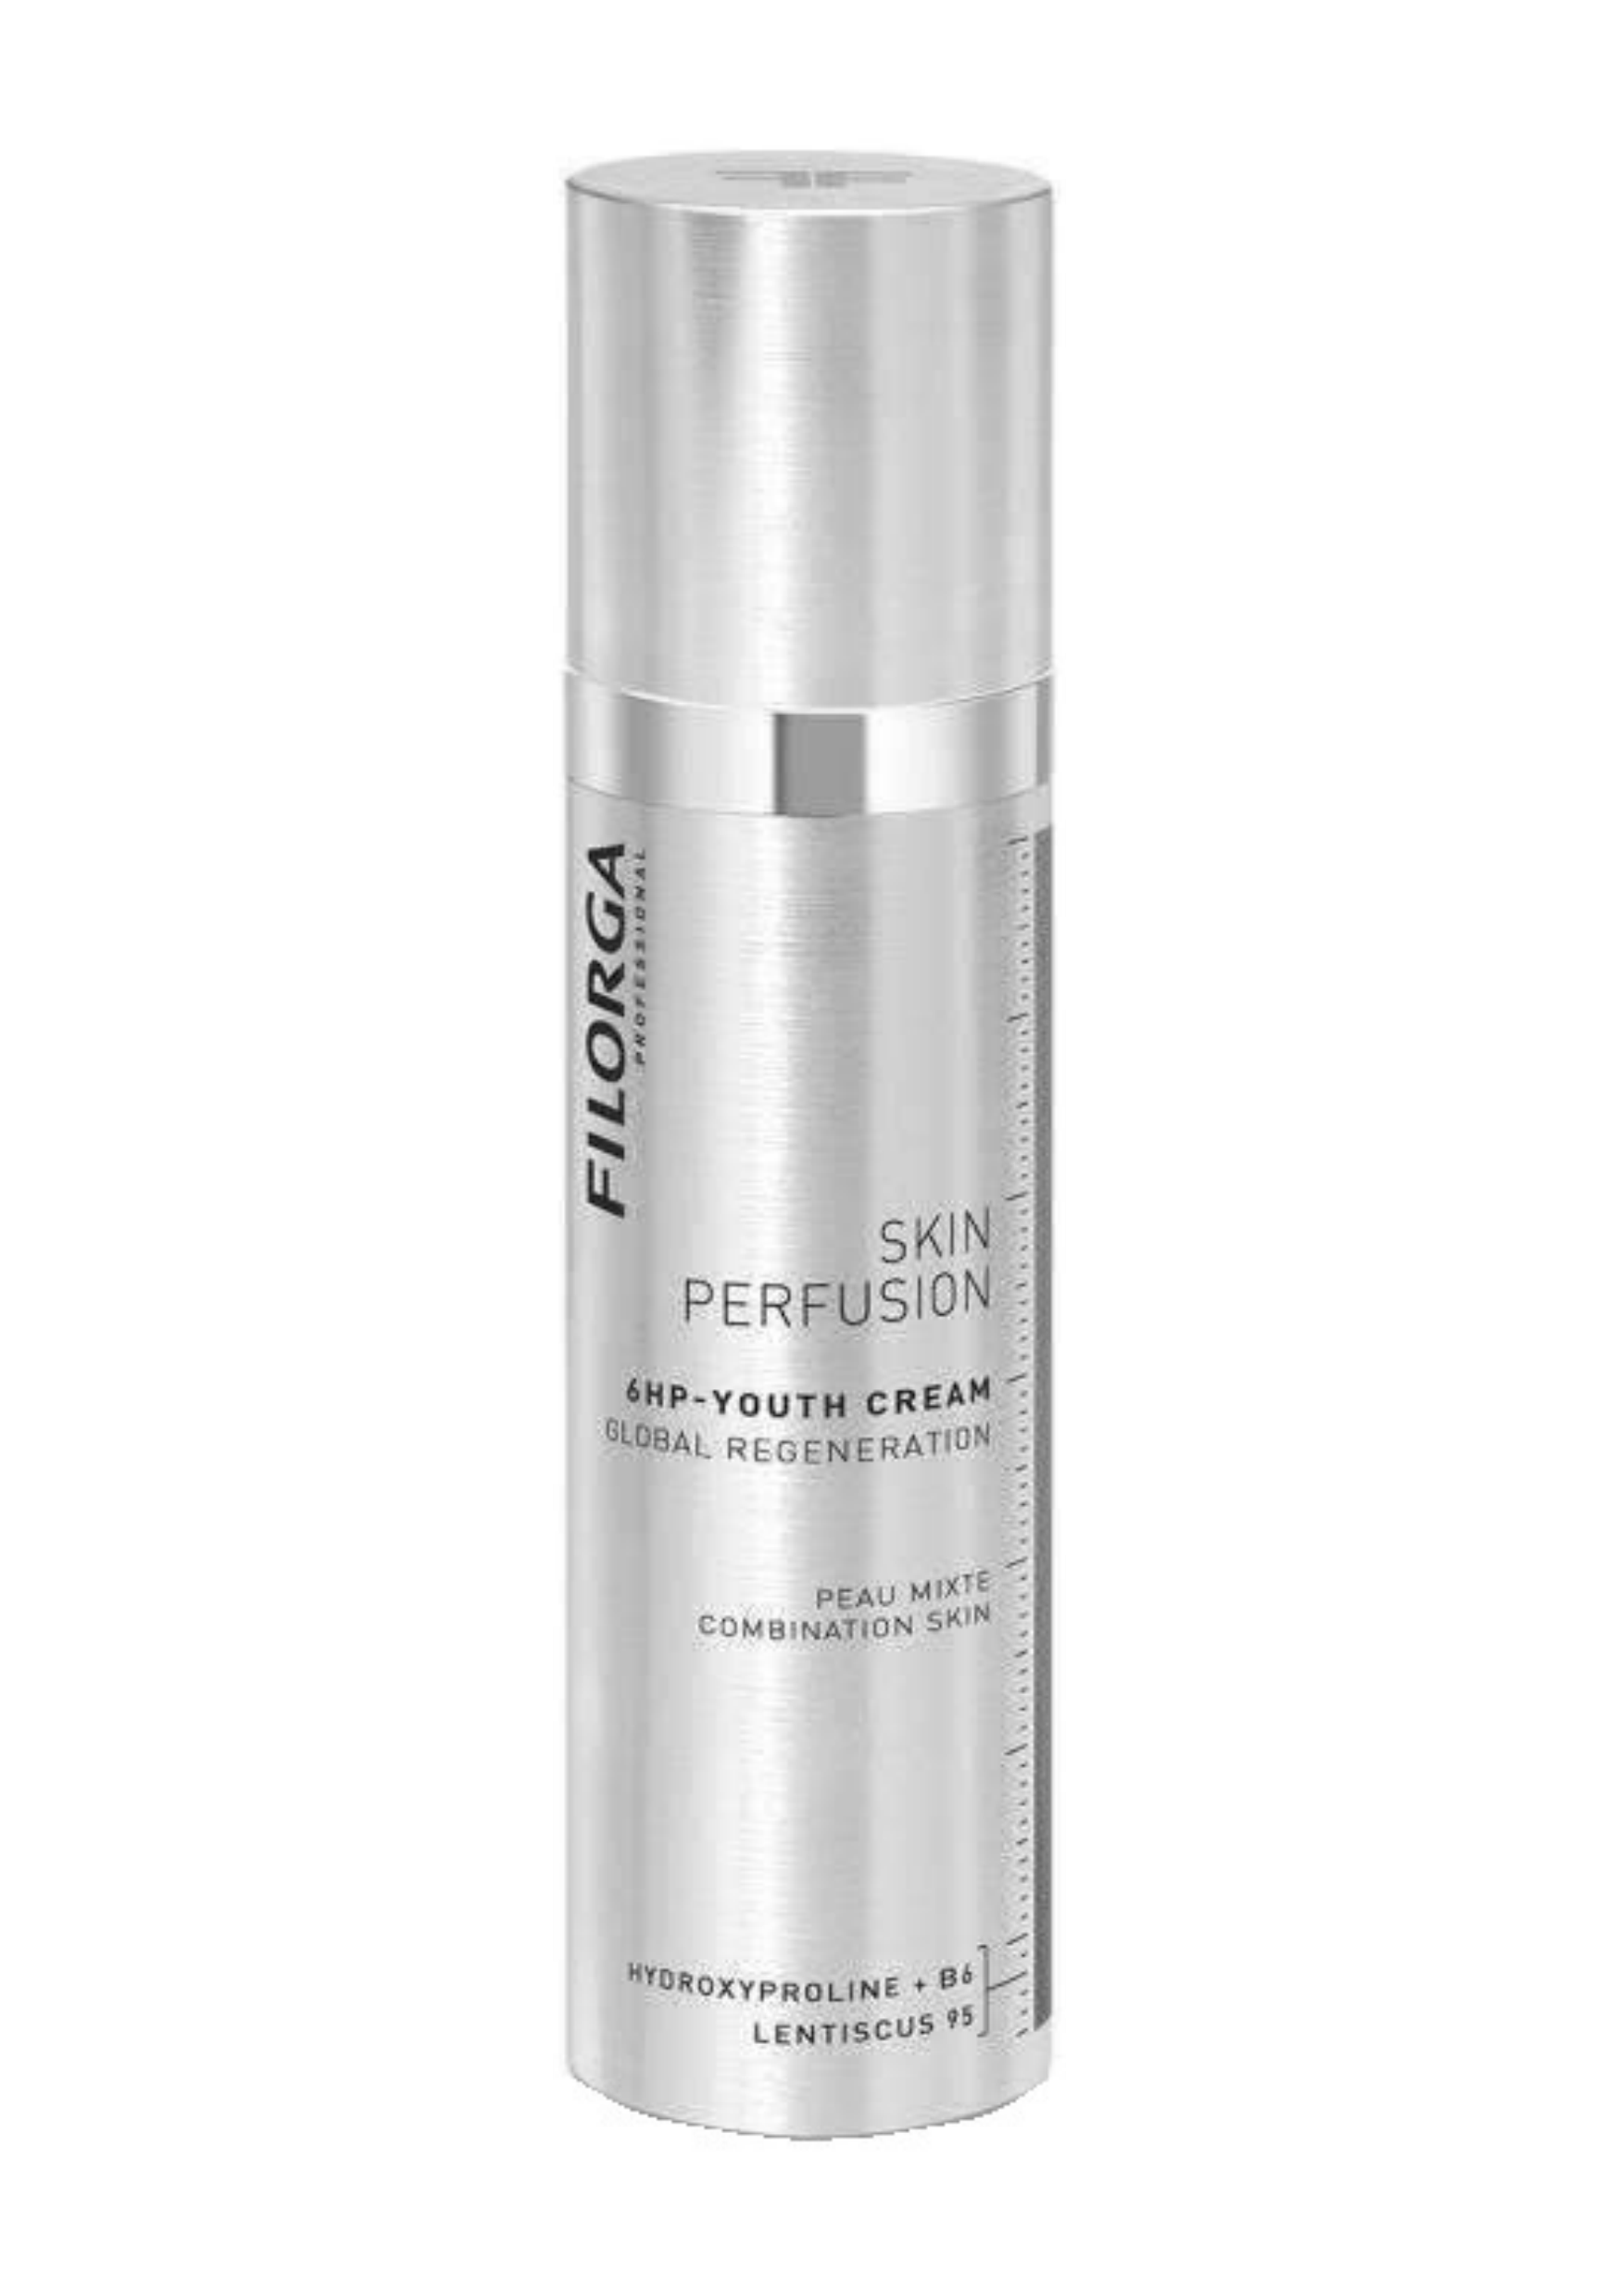 Skin Perfusion 6HP-Youth Cream